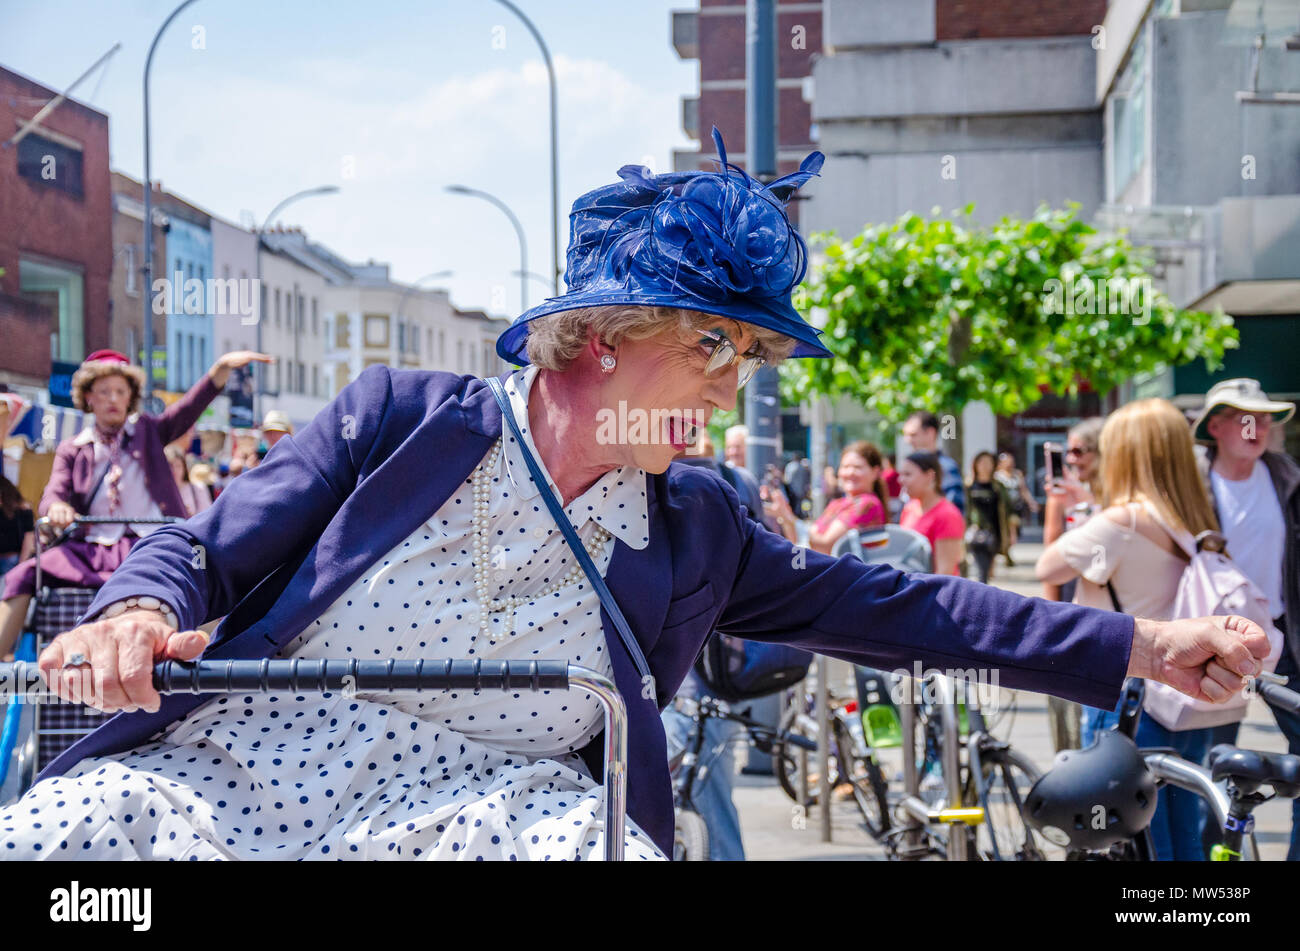 A man dressed up as an old woman riding a shopping trolley is actually a street performer entertaining crowds at a Hammersmith & Fulham Spring Market Stock Photo